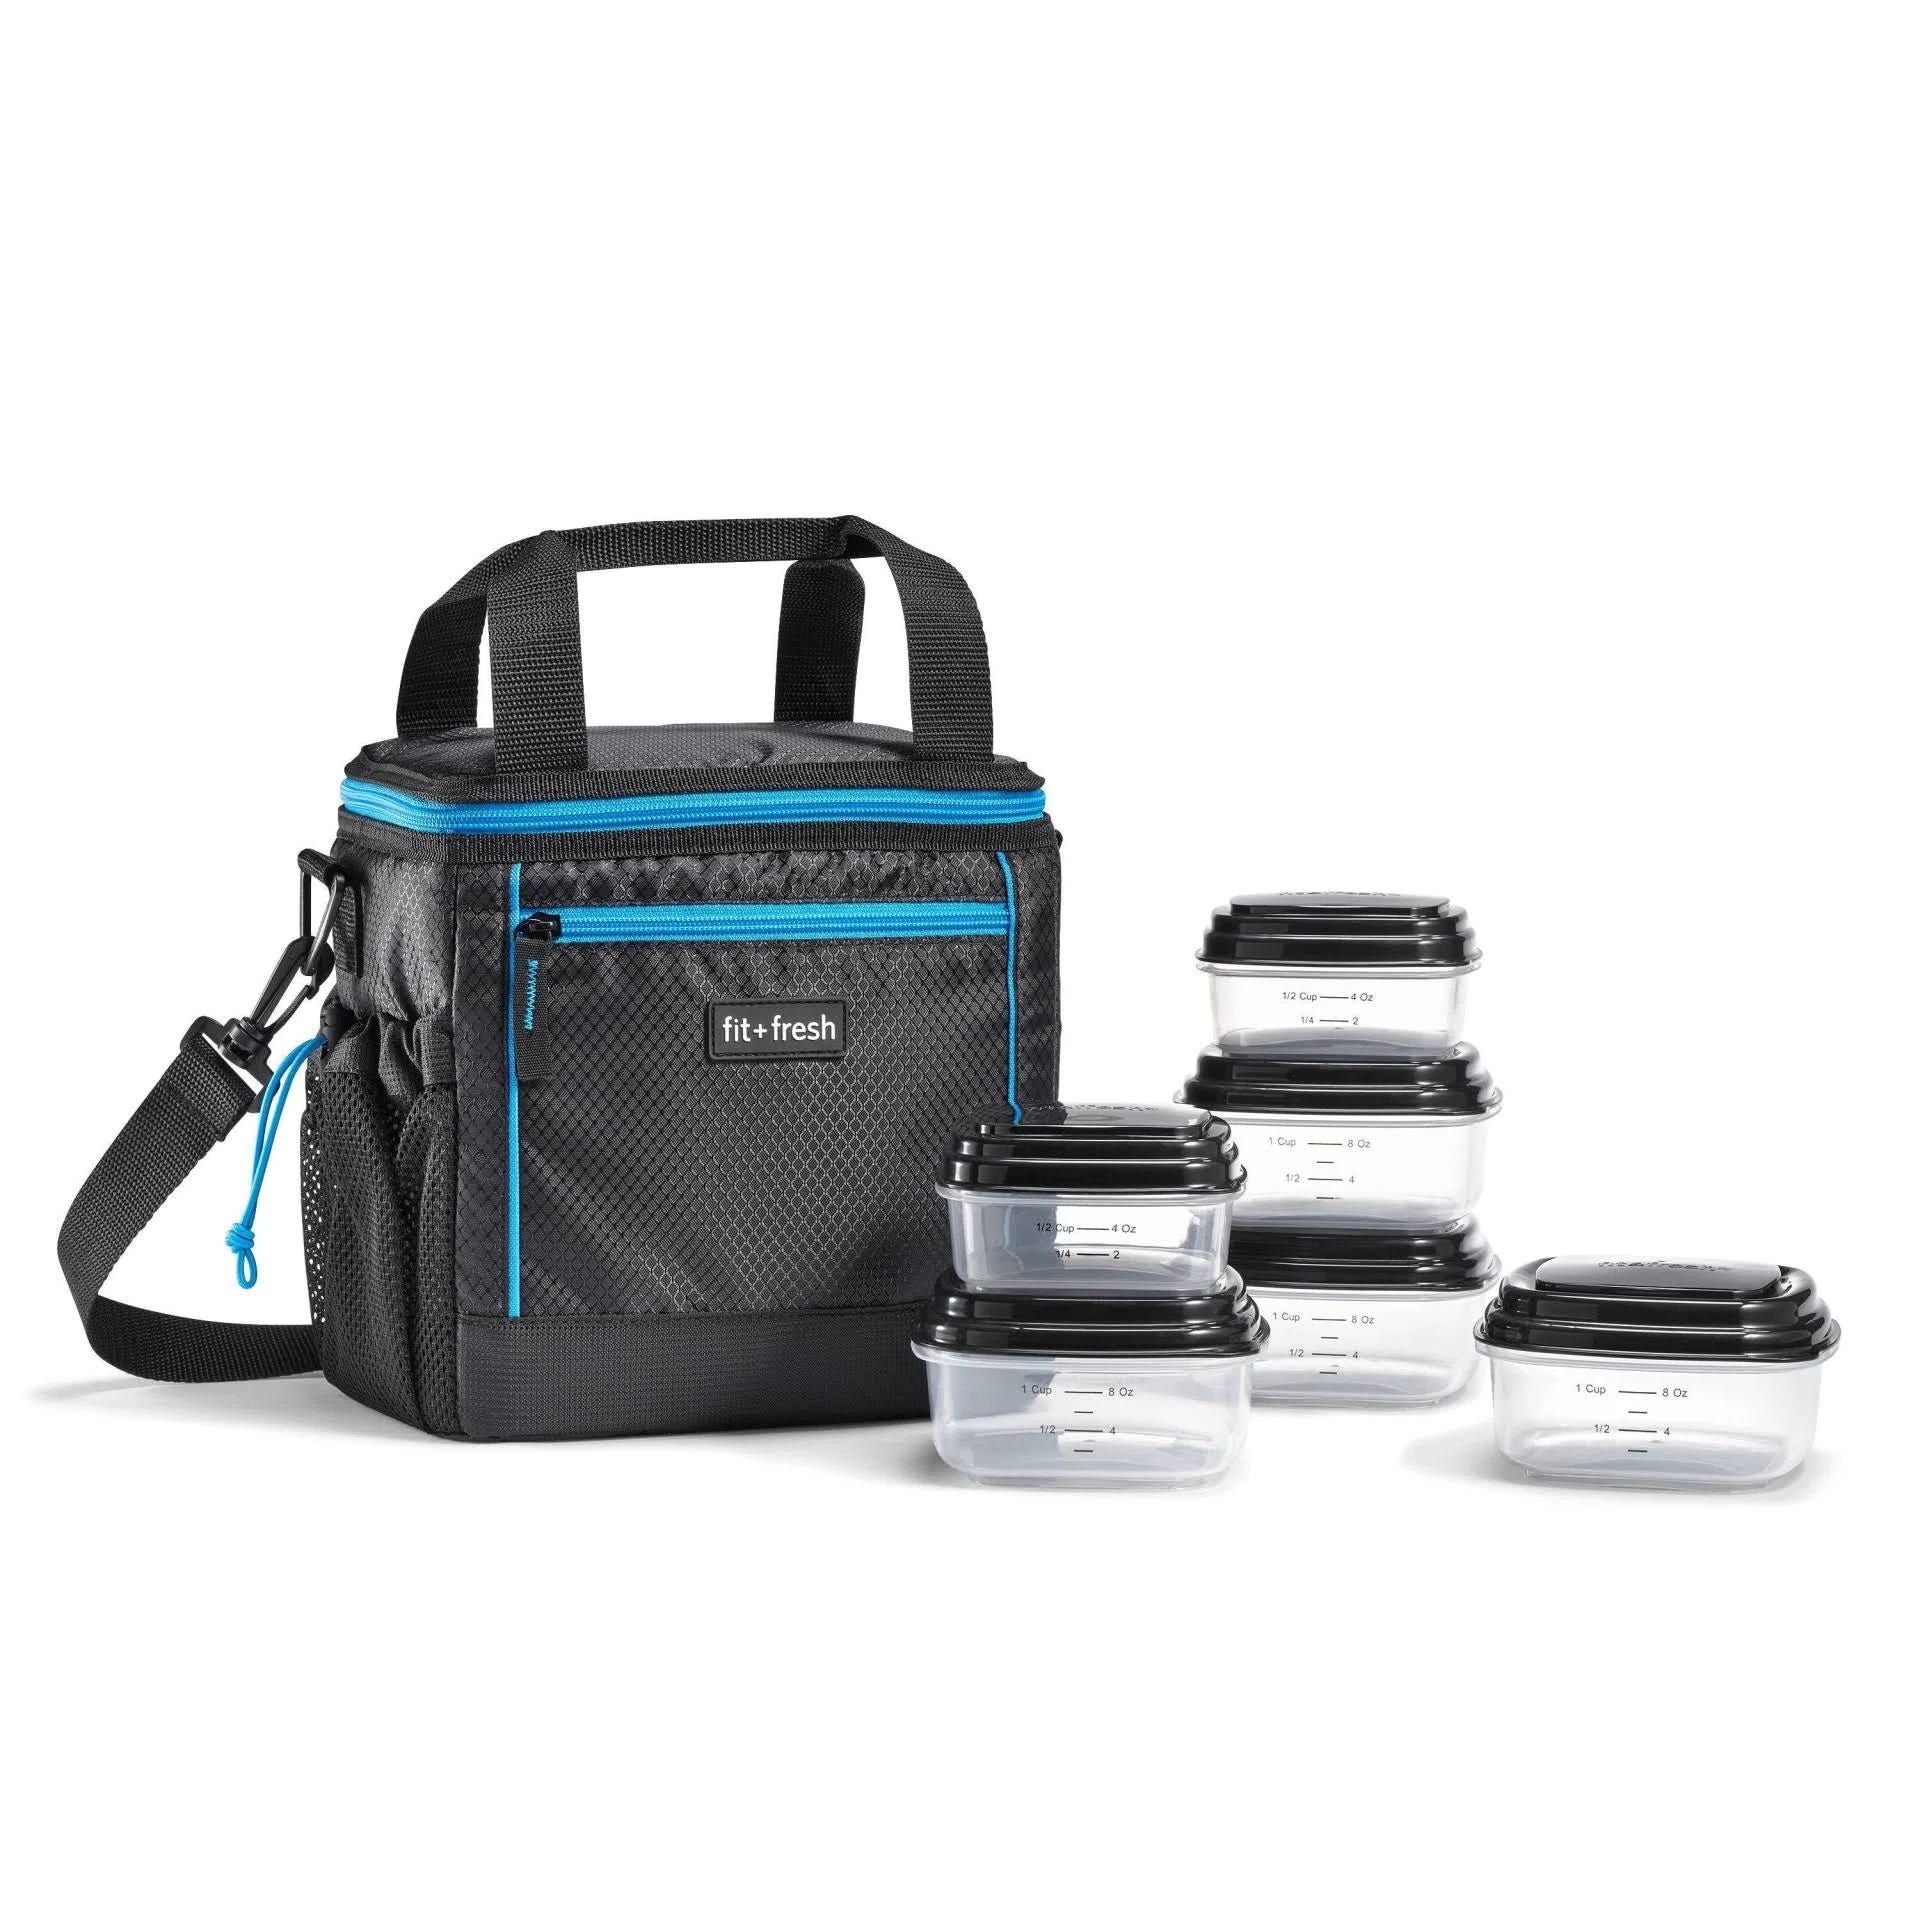 Fit & Fresh Sport Cooler Lunch Tote: Insulated Bag with Drink Compartments | Image